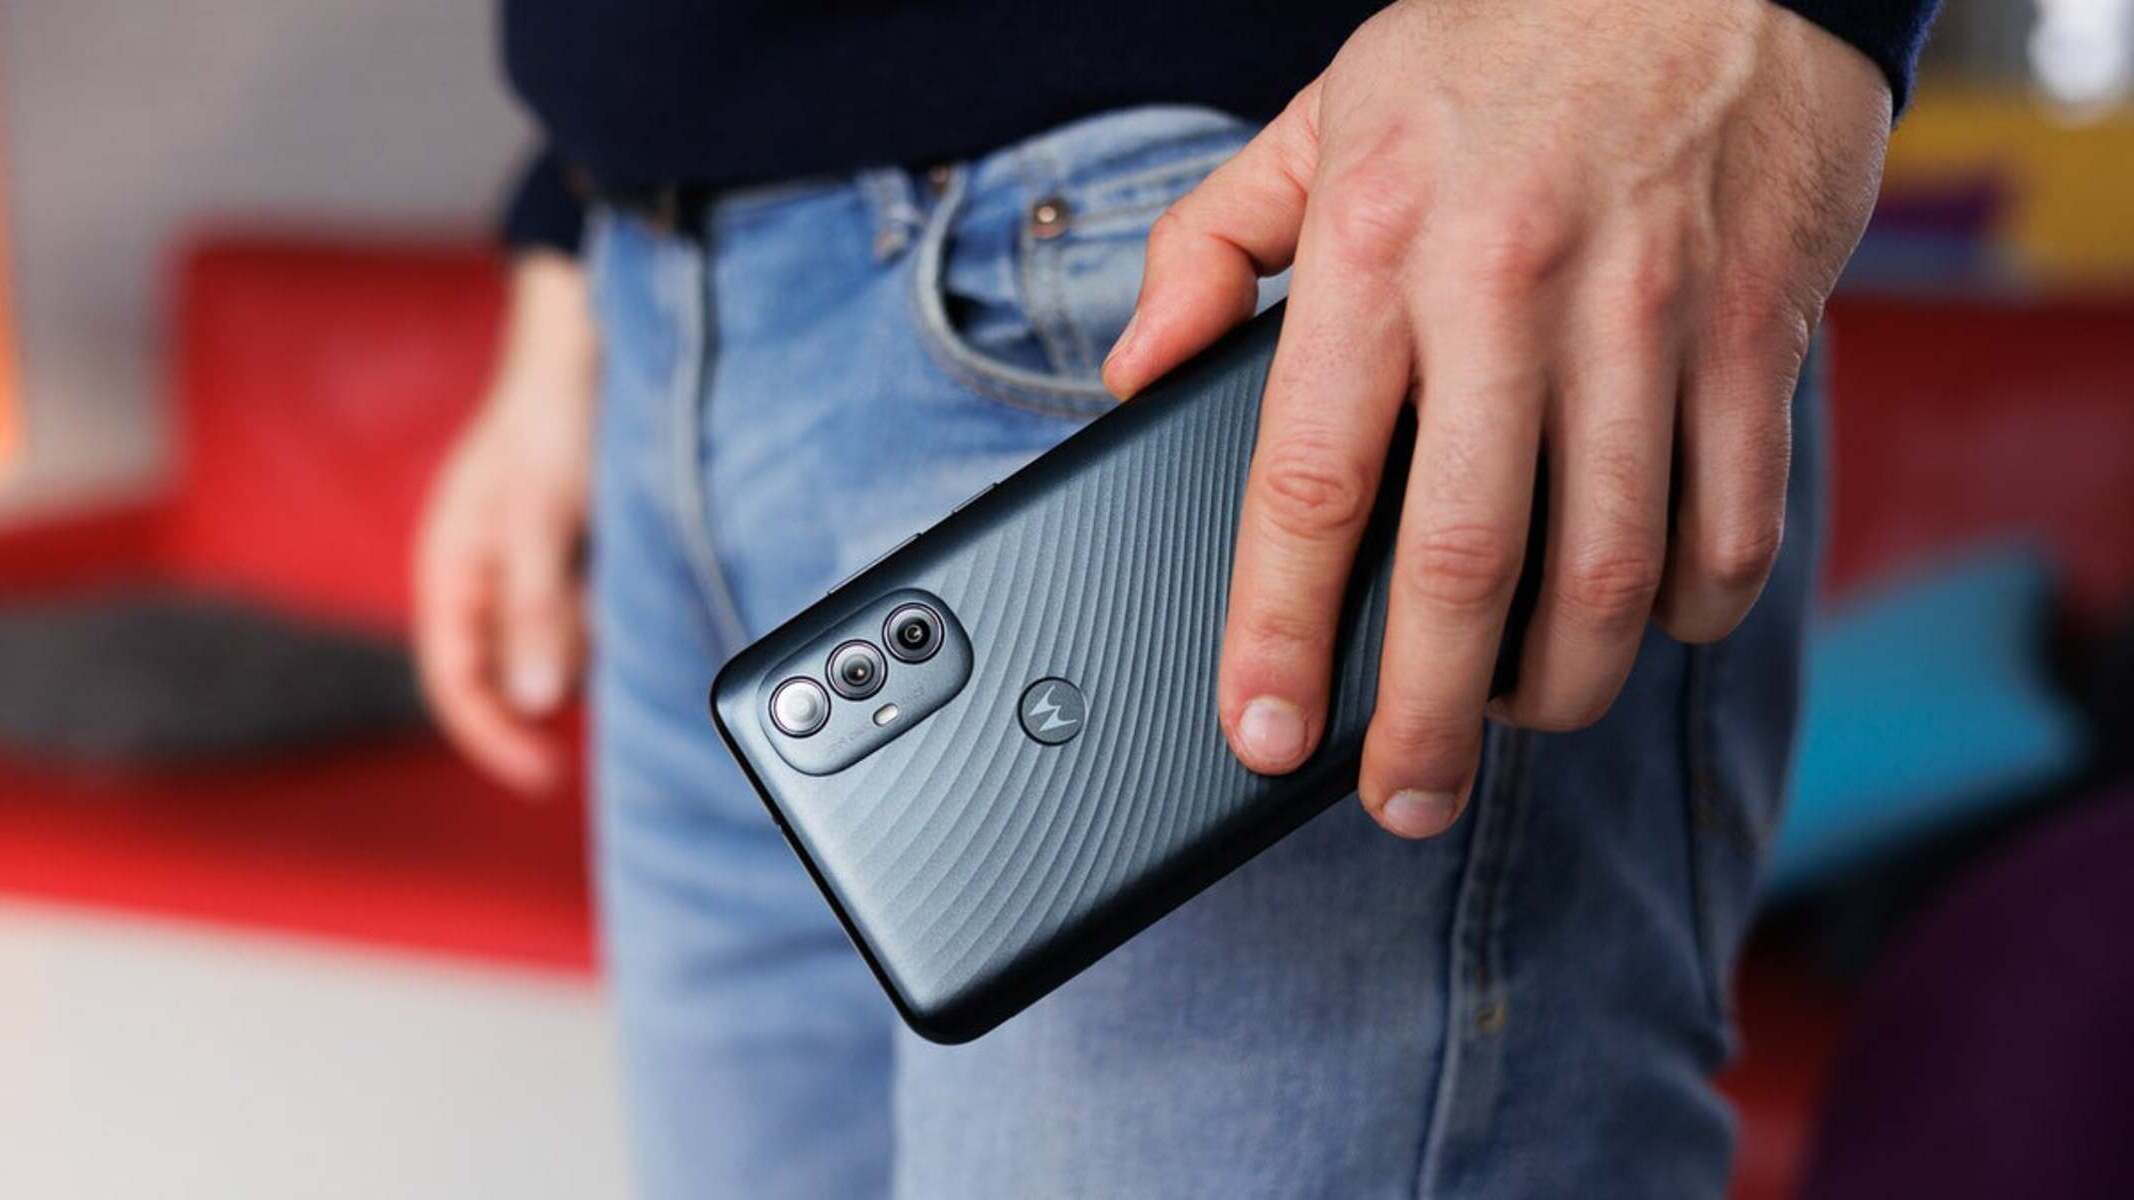 locating-the-back-button-on-moto-g-power